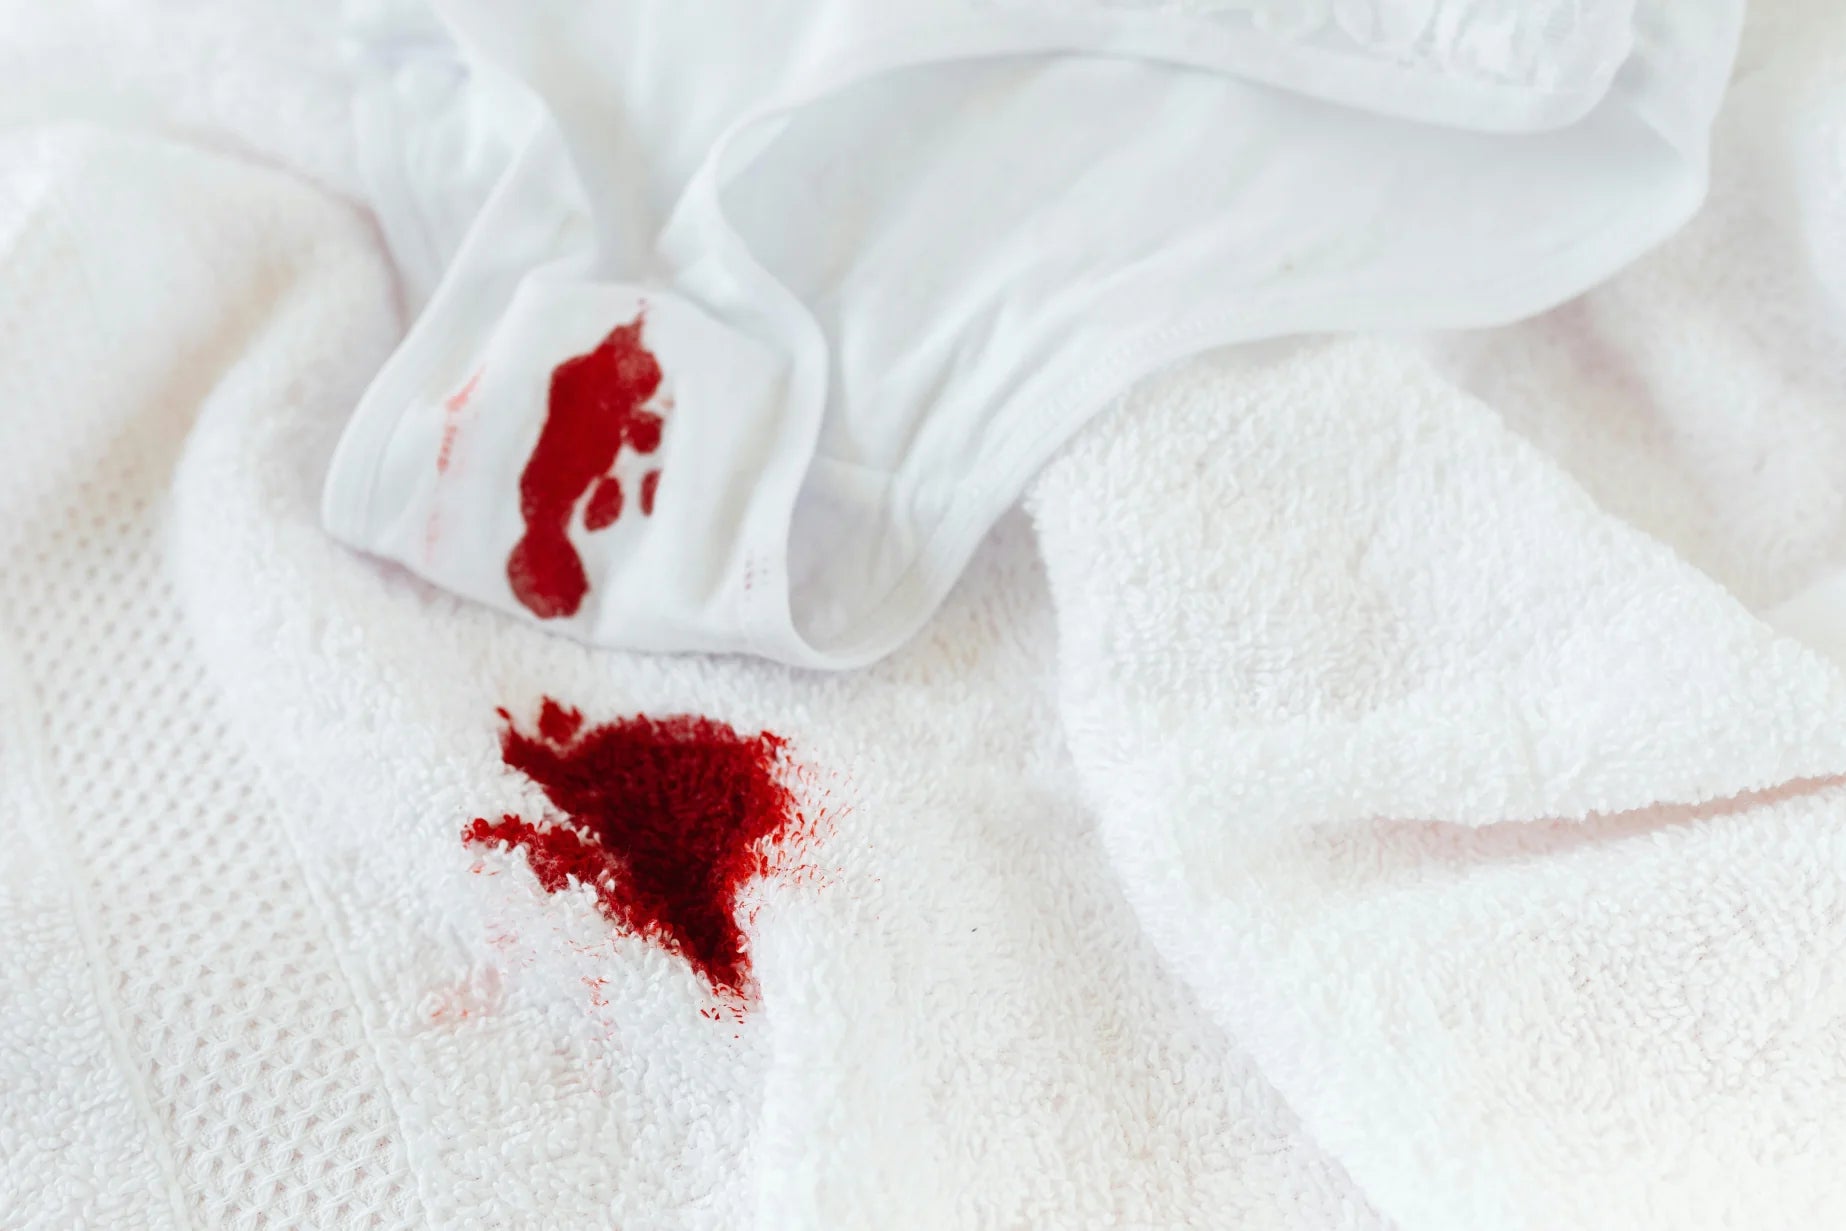 How to remove menstruation blood from clothes: effective methods